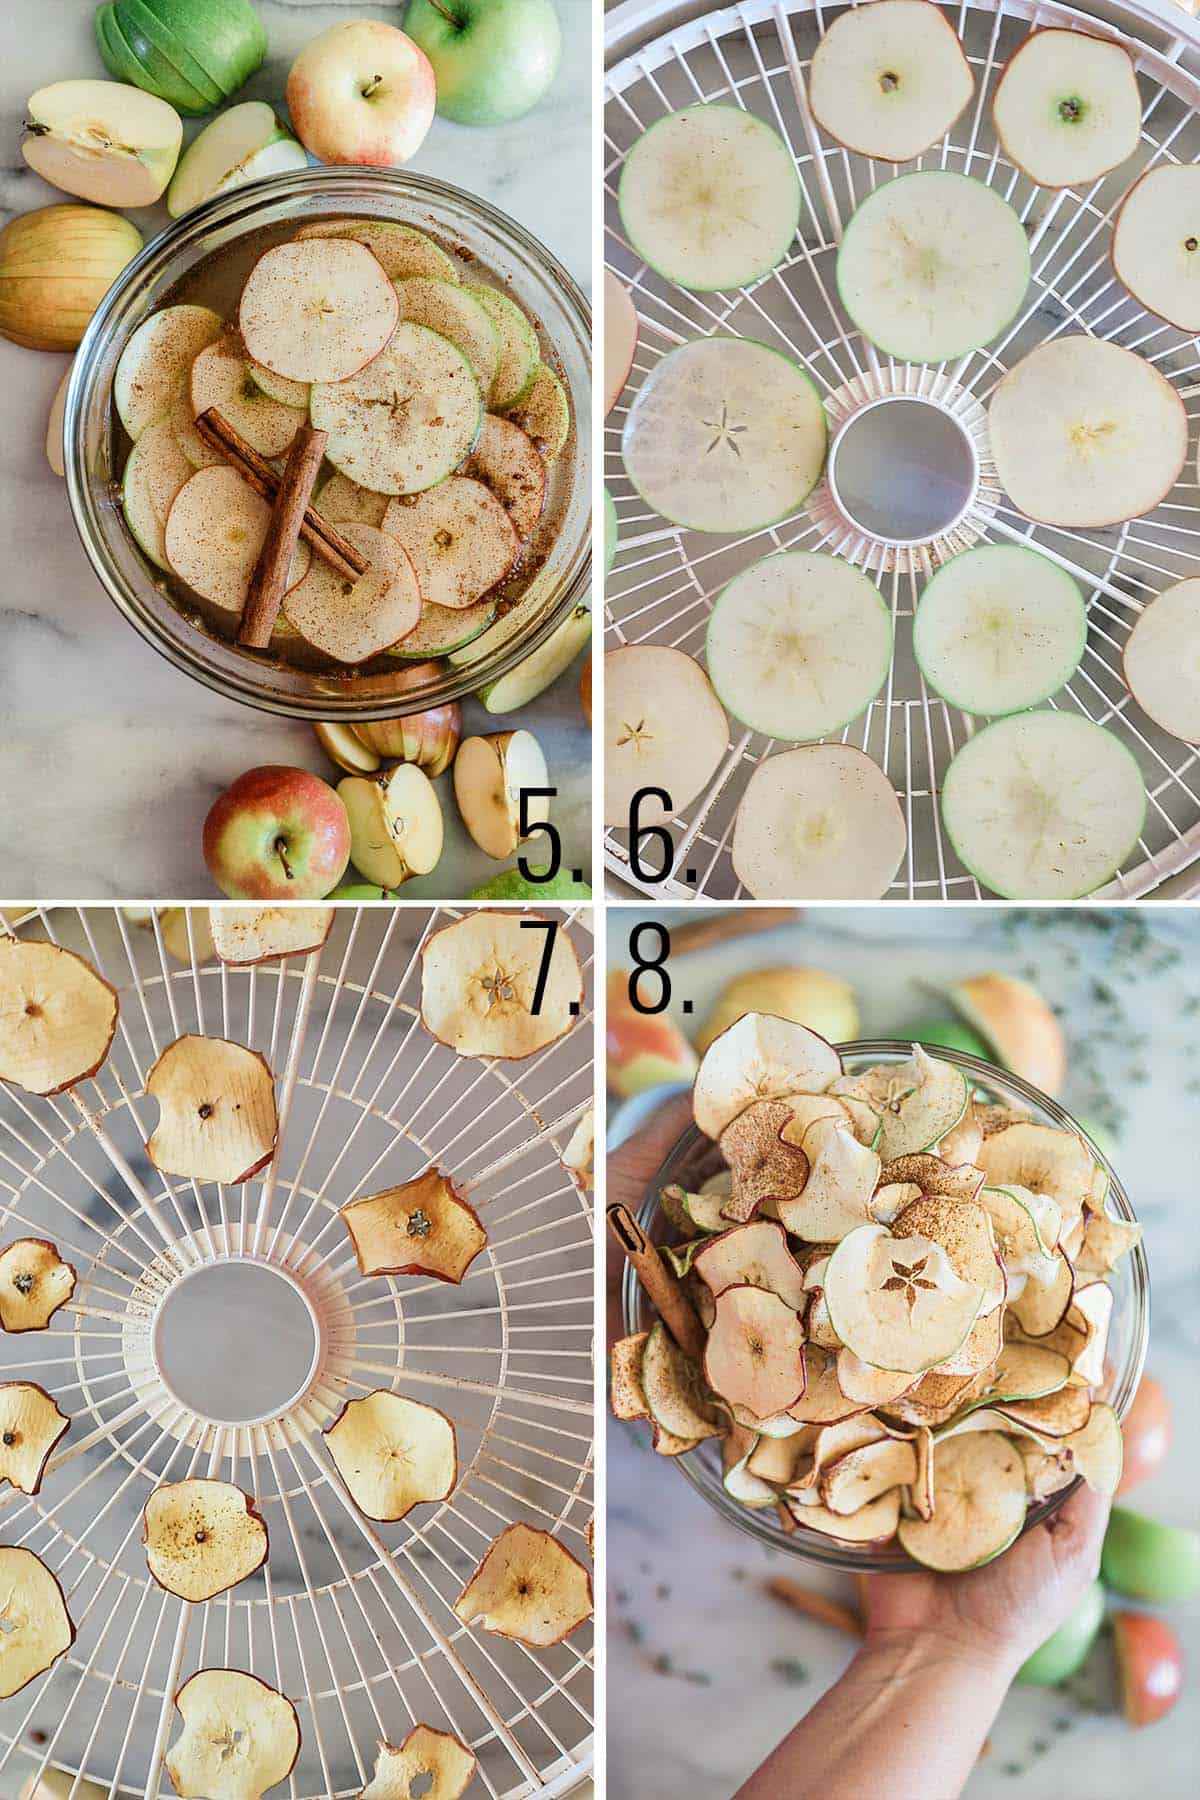 How to make apple chips in the dehydrator.